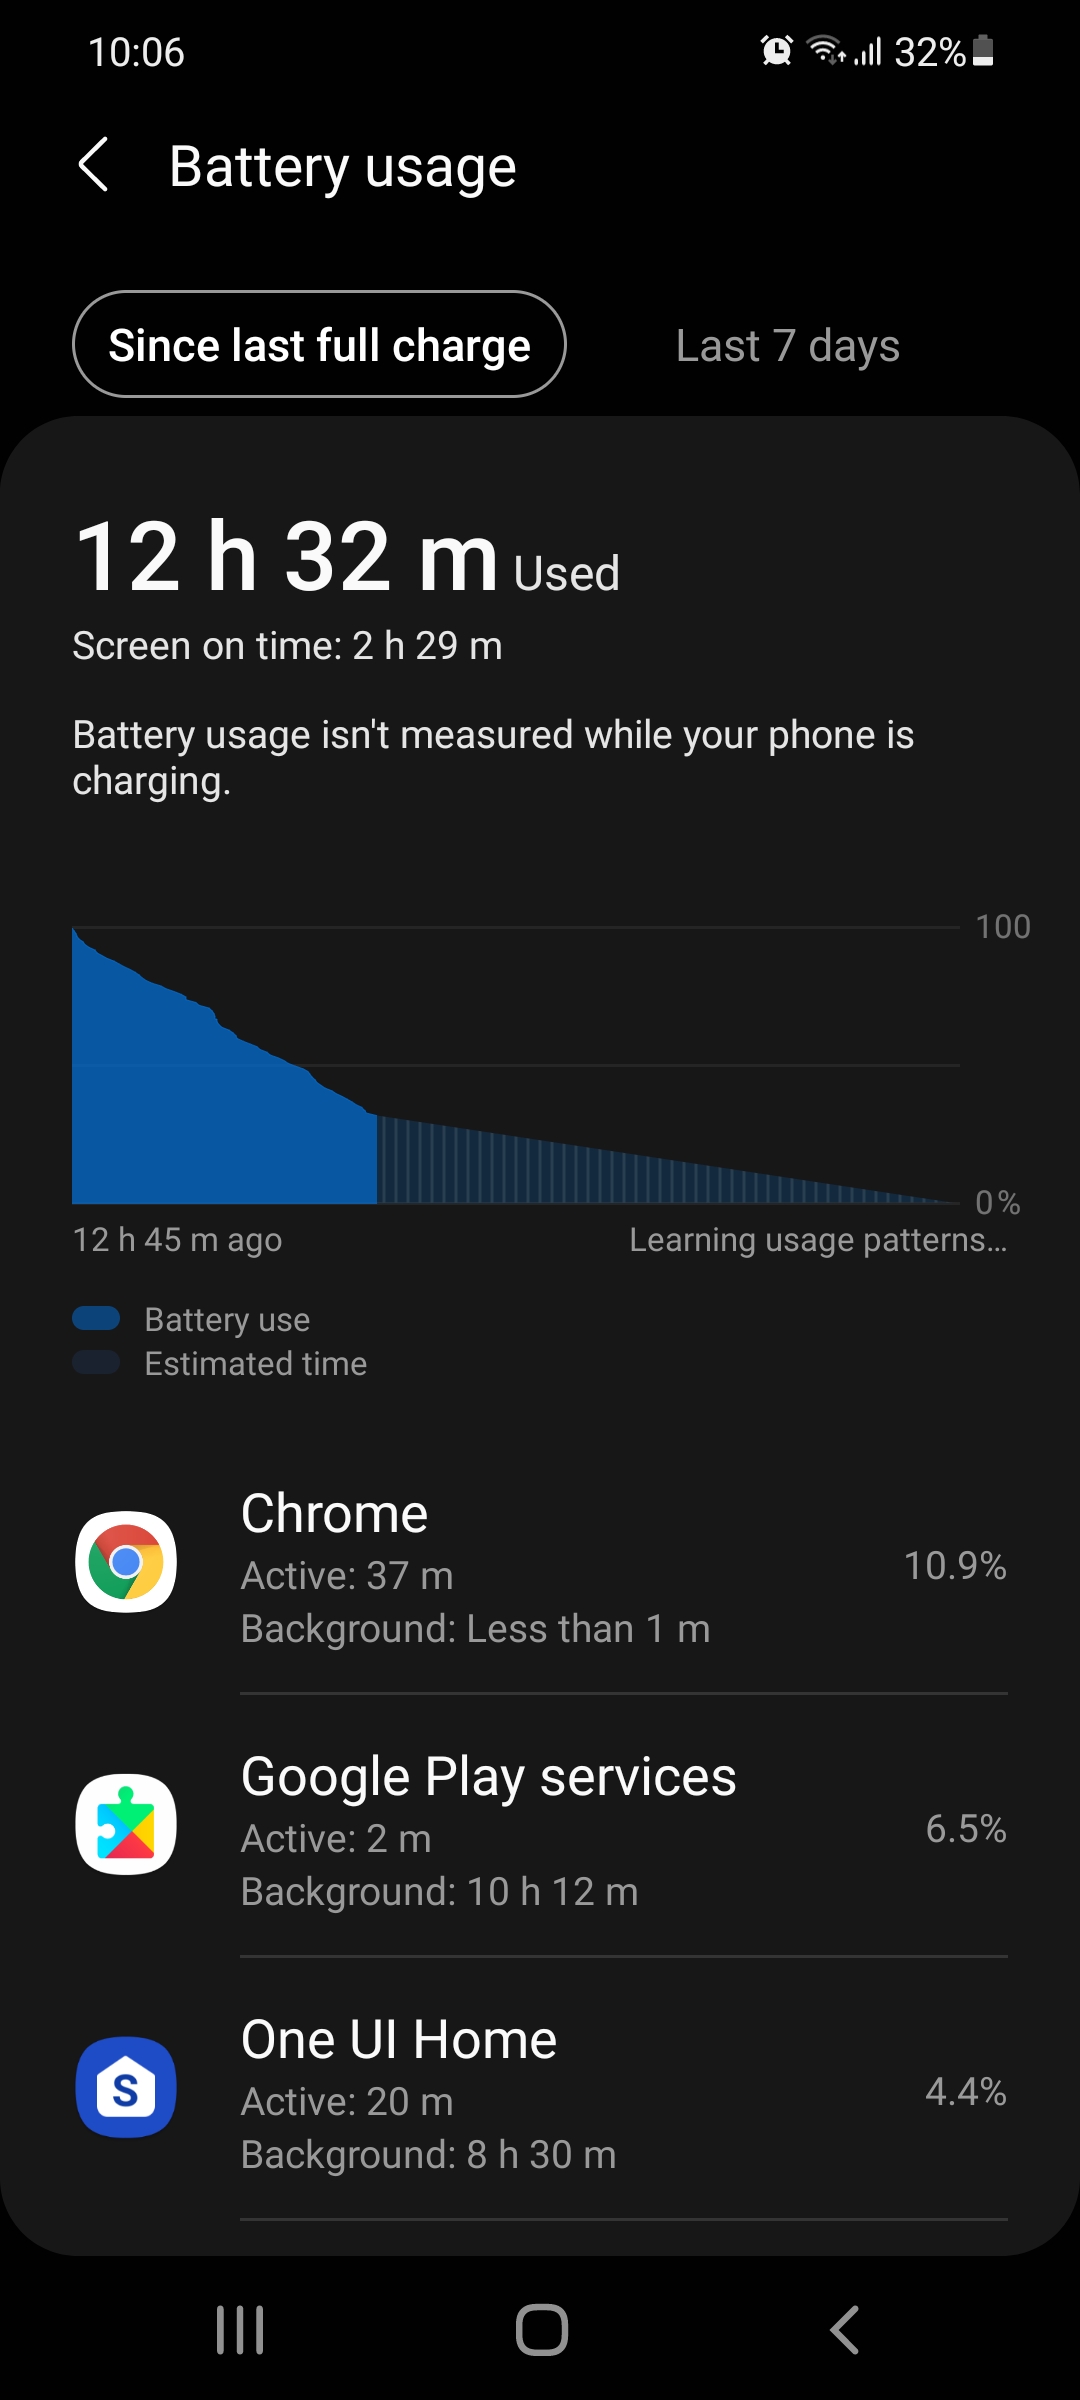 Google play services draining my s21 battery - Samsung Community